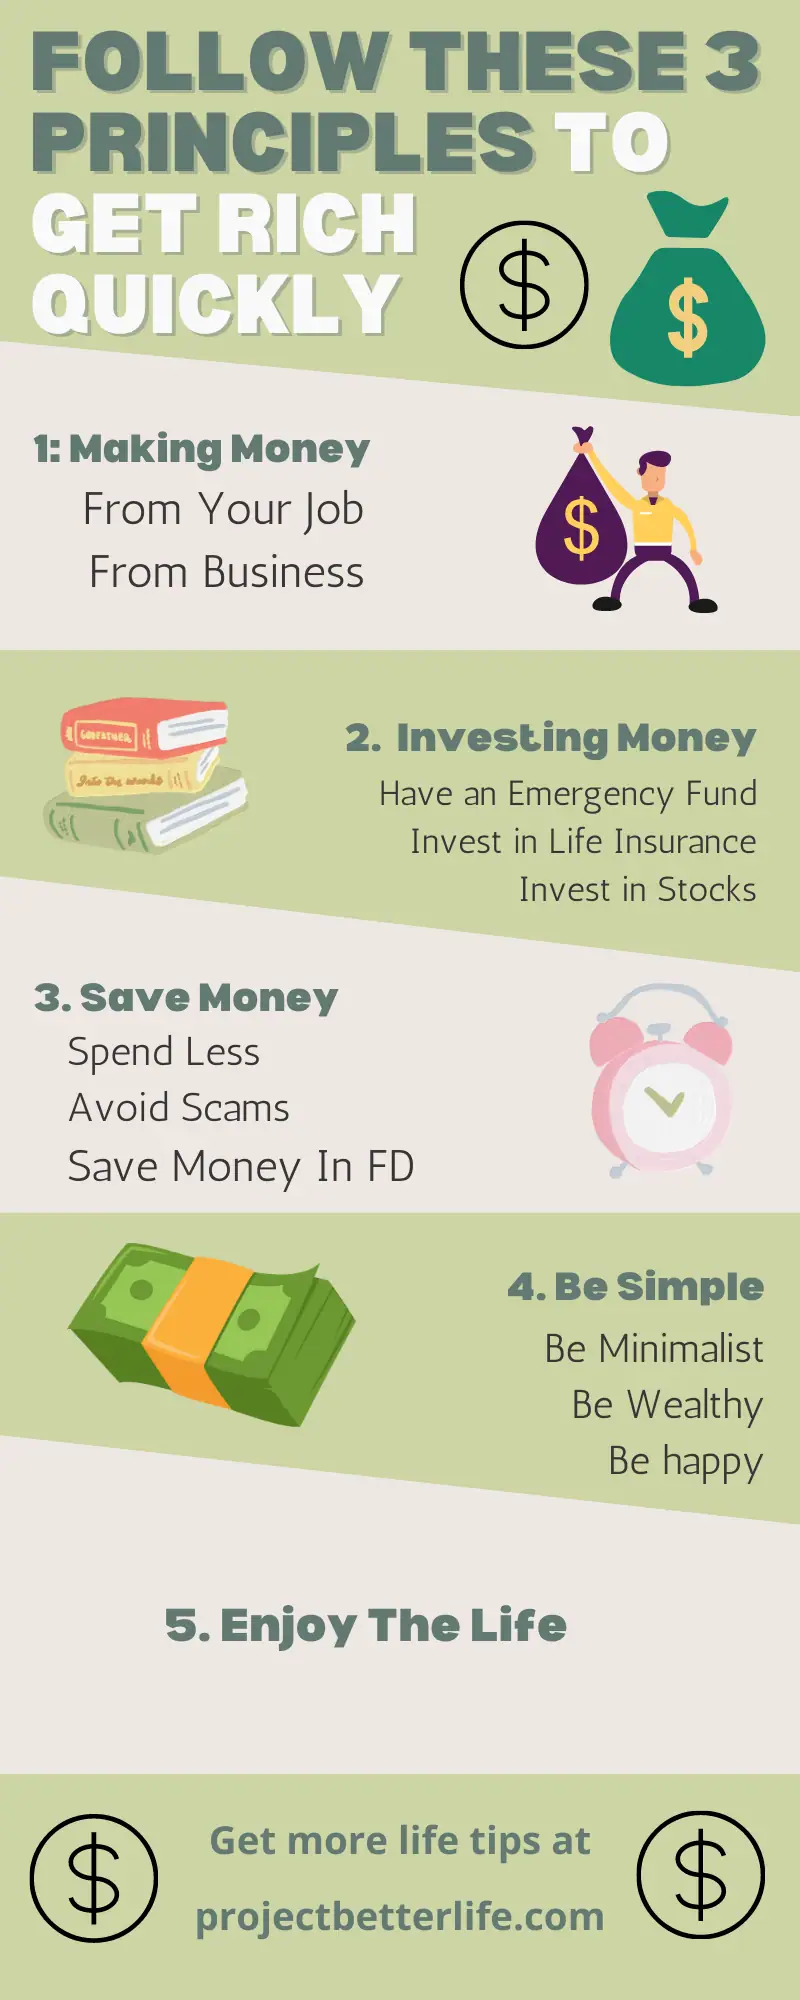 Follow These 3 Principles to get rich quickly